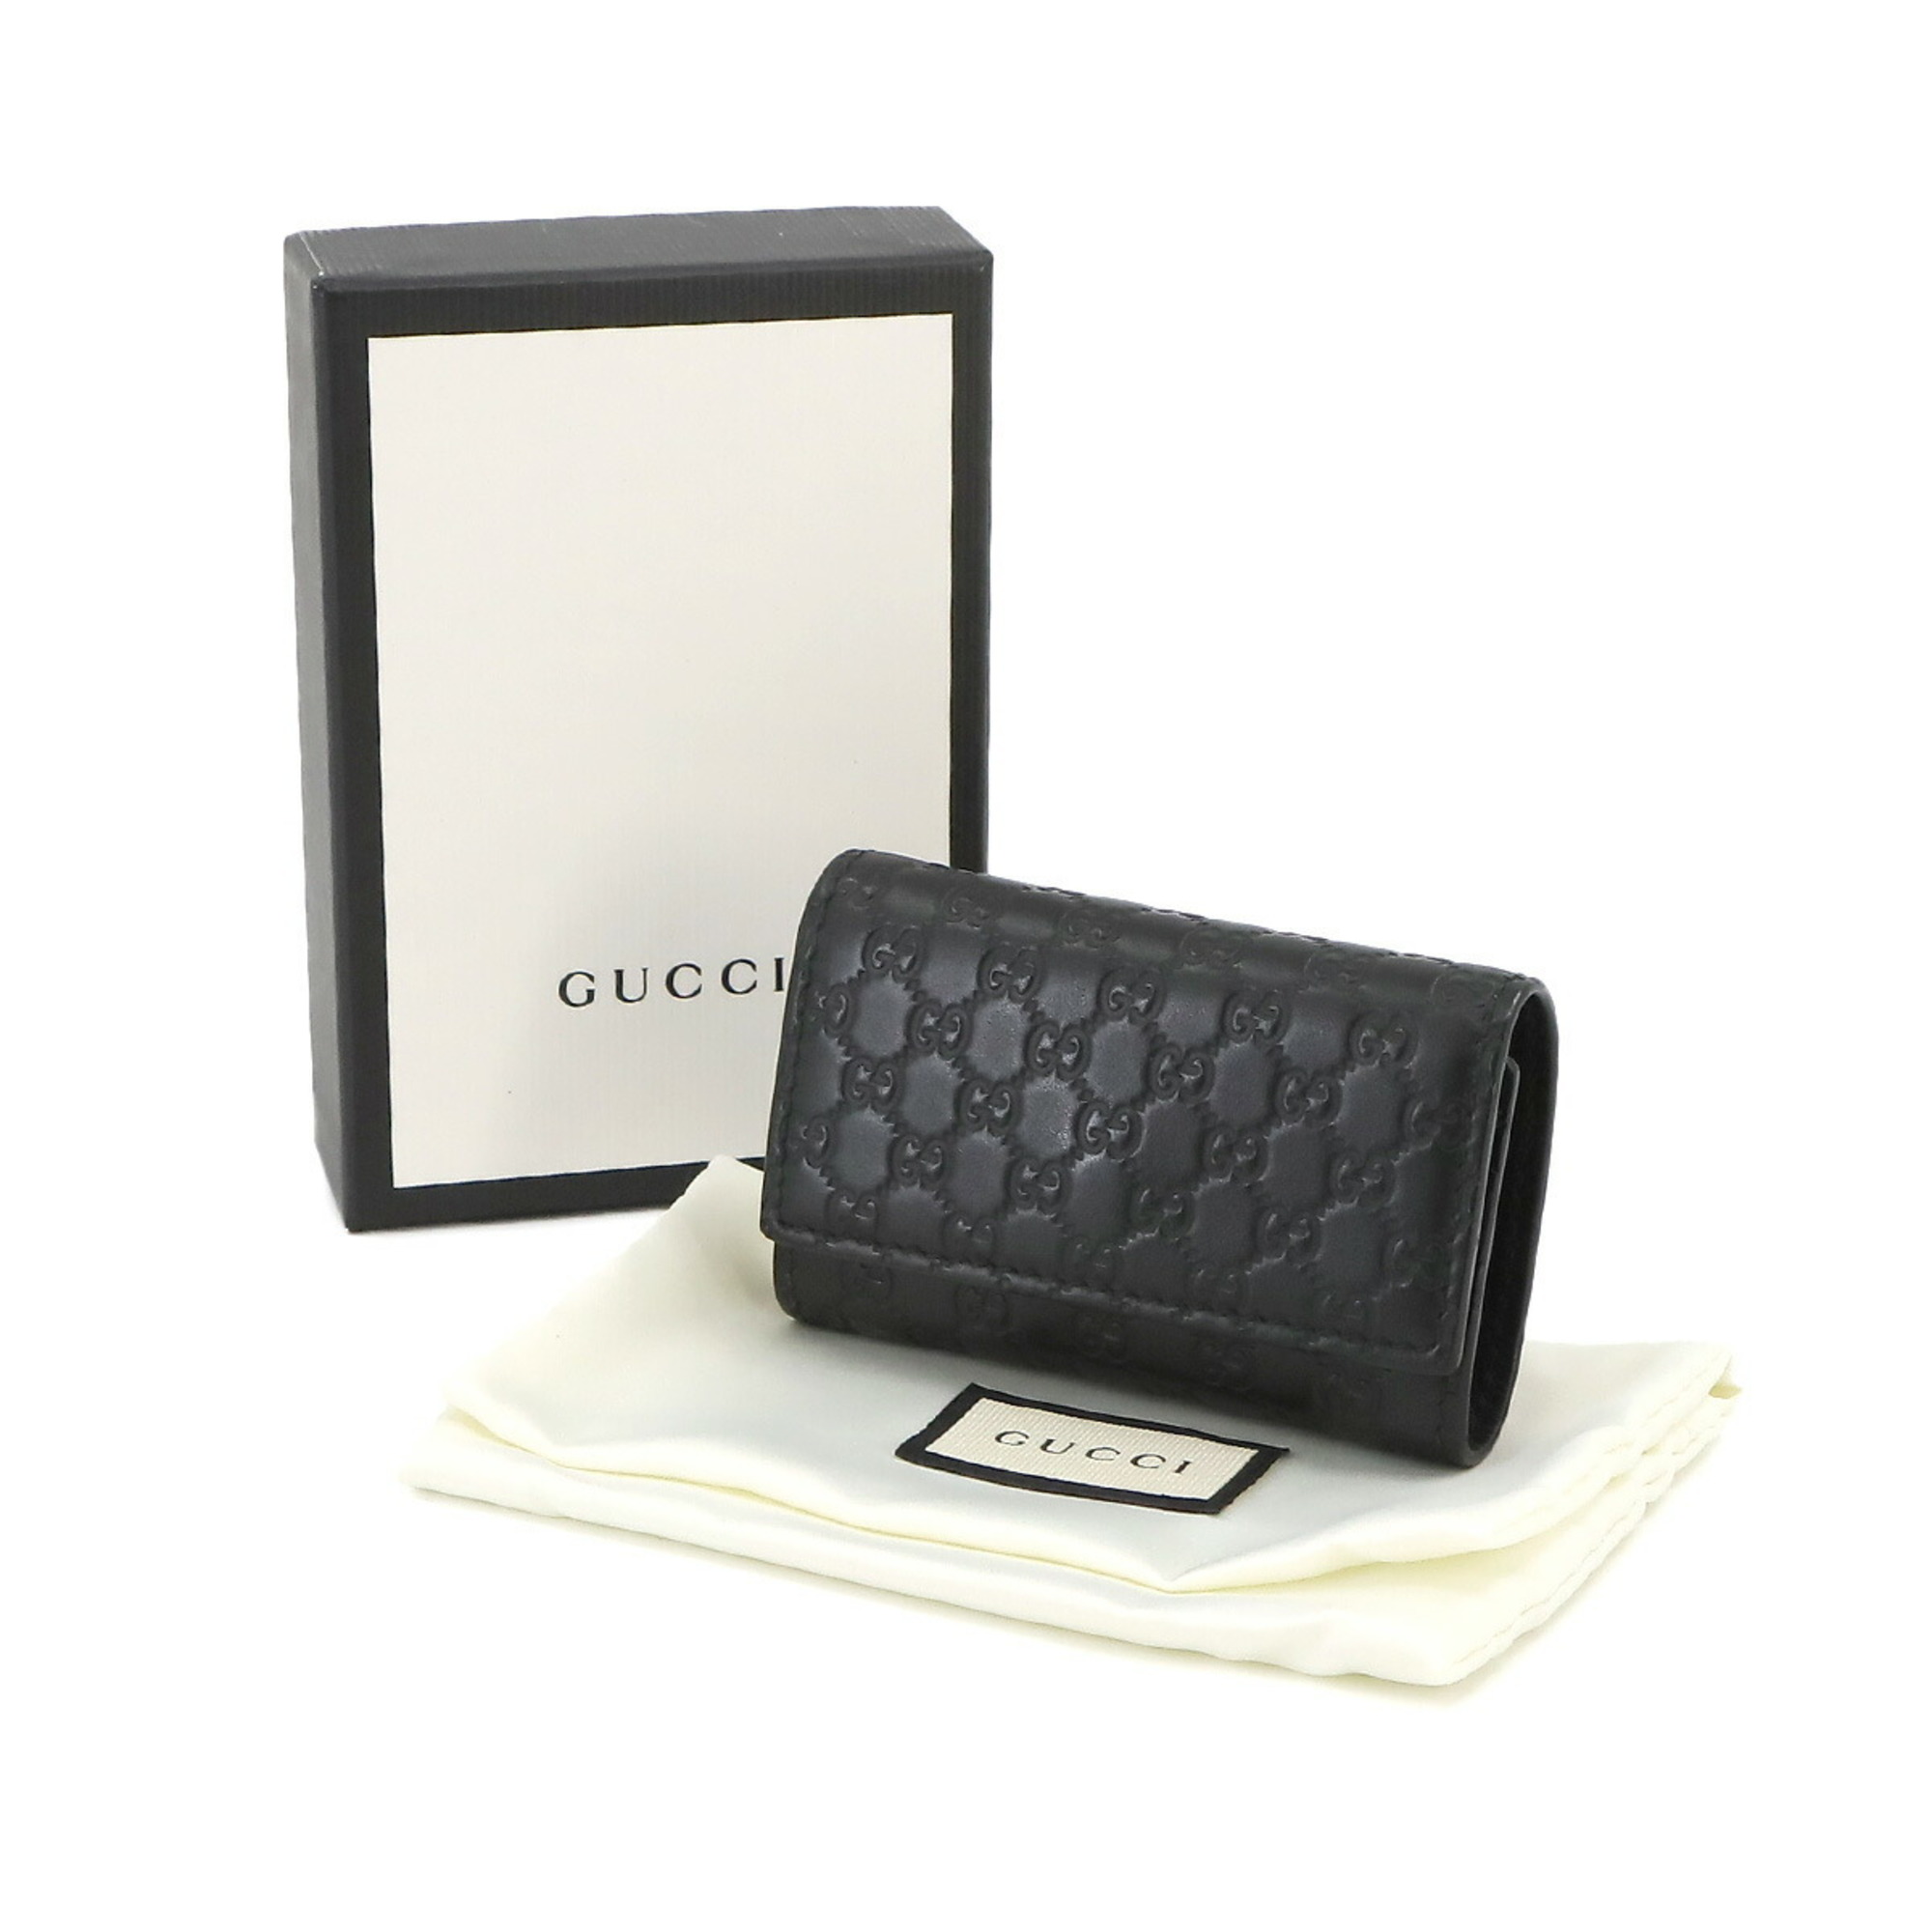 GUCCI Micro Guccissima 6-ring Key Case Leather Black 150402 Silver Metal Fittings